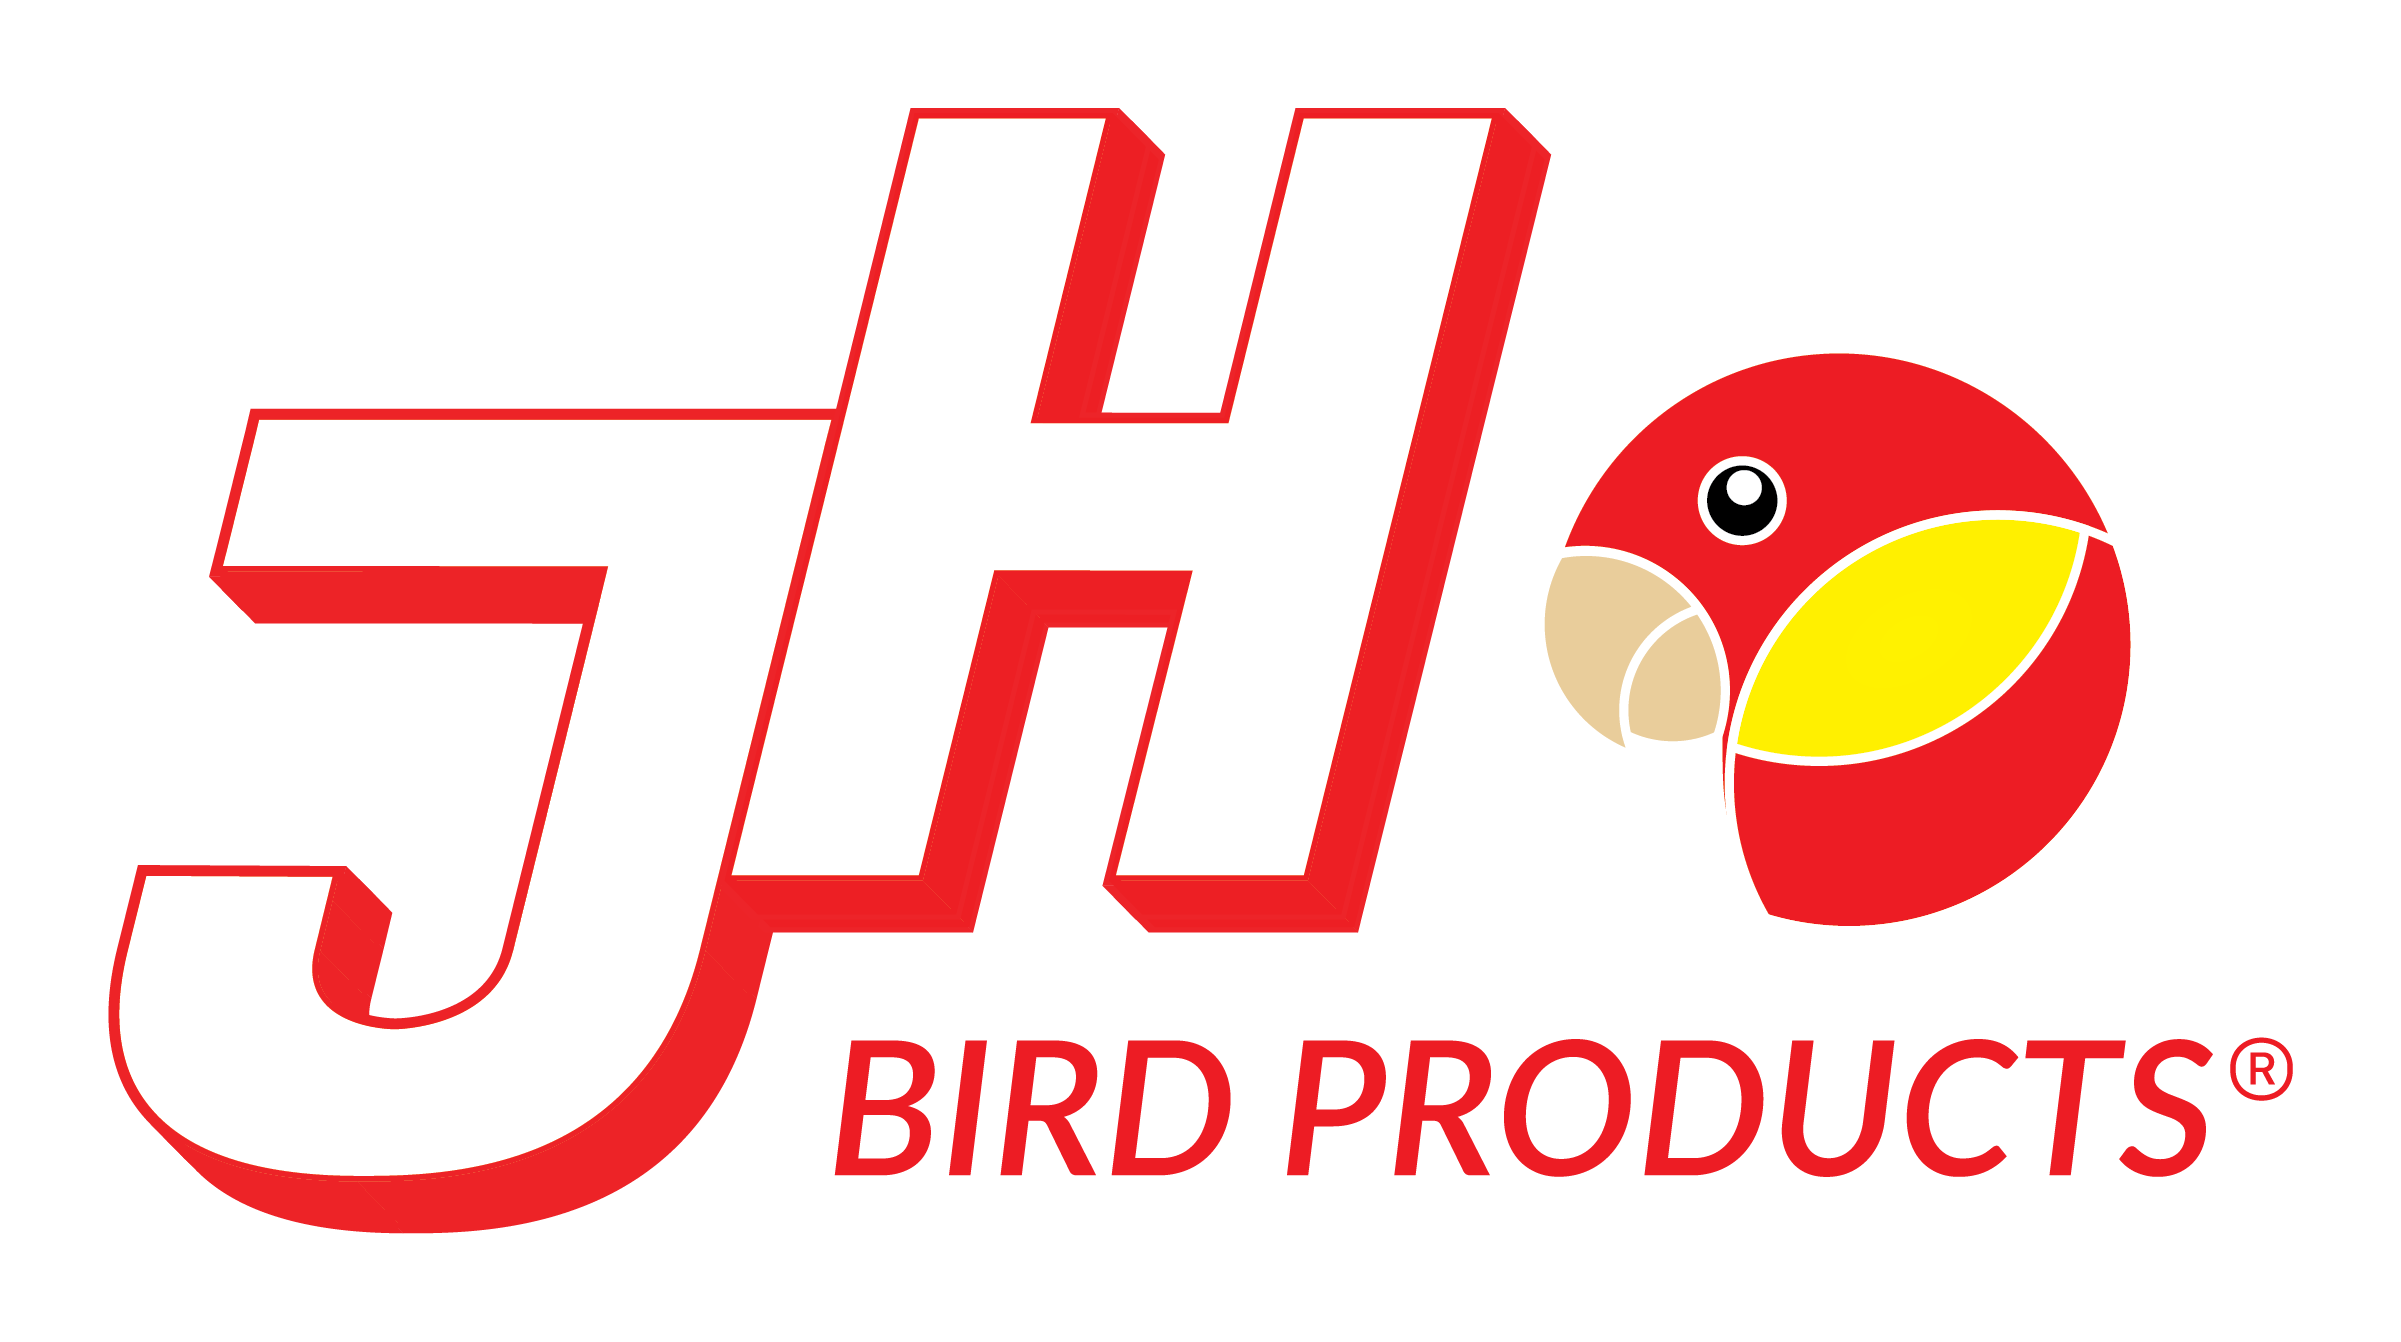 JH Bird Products